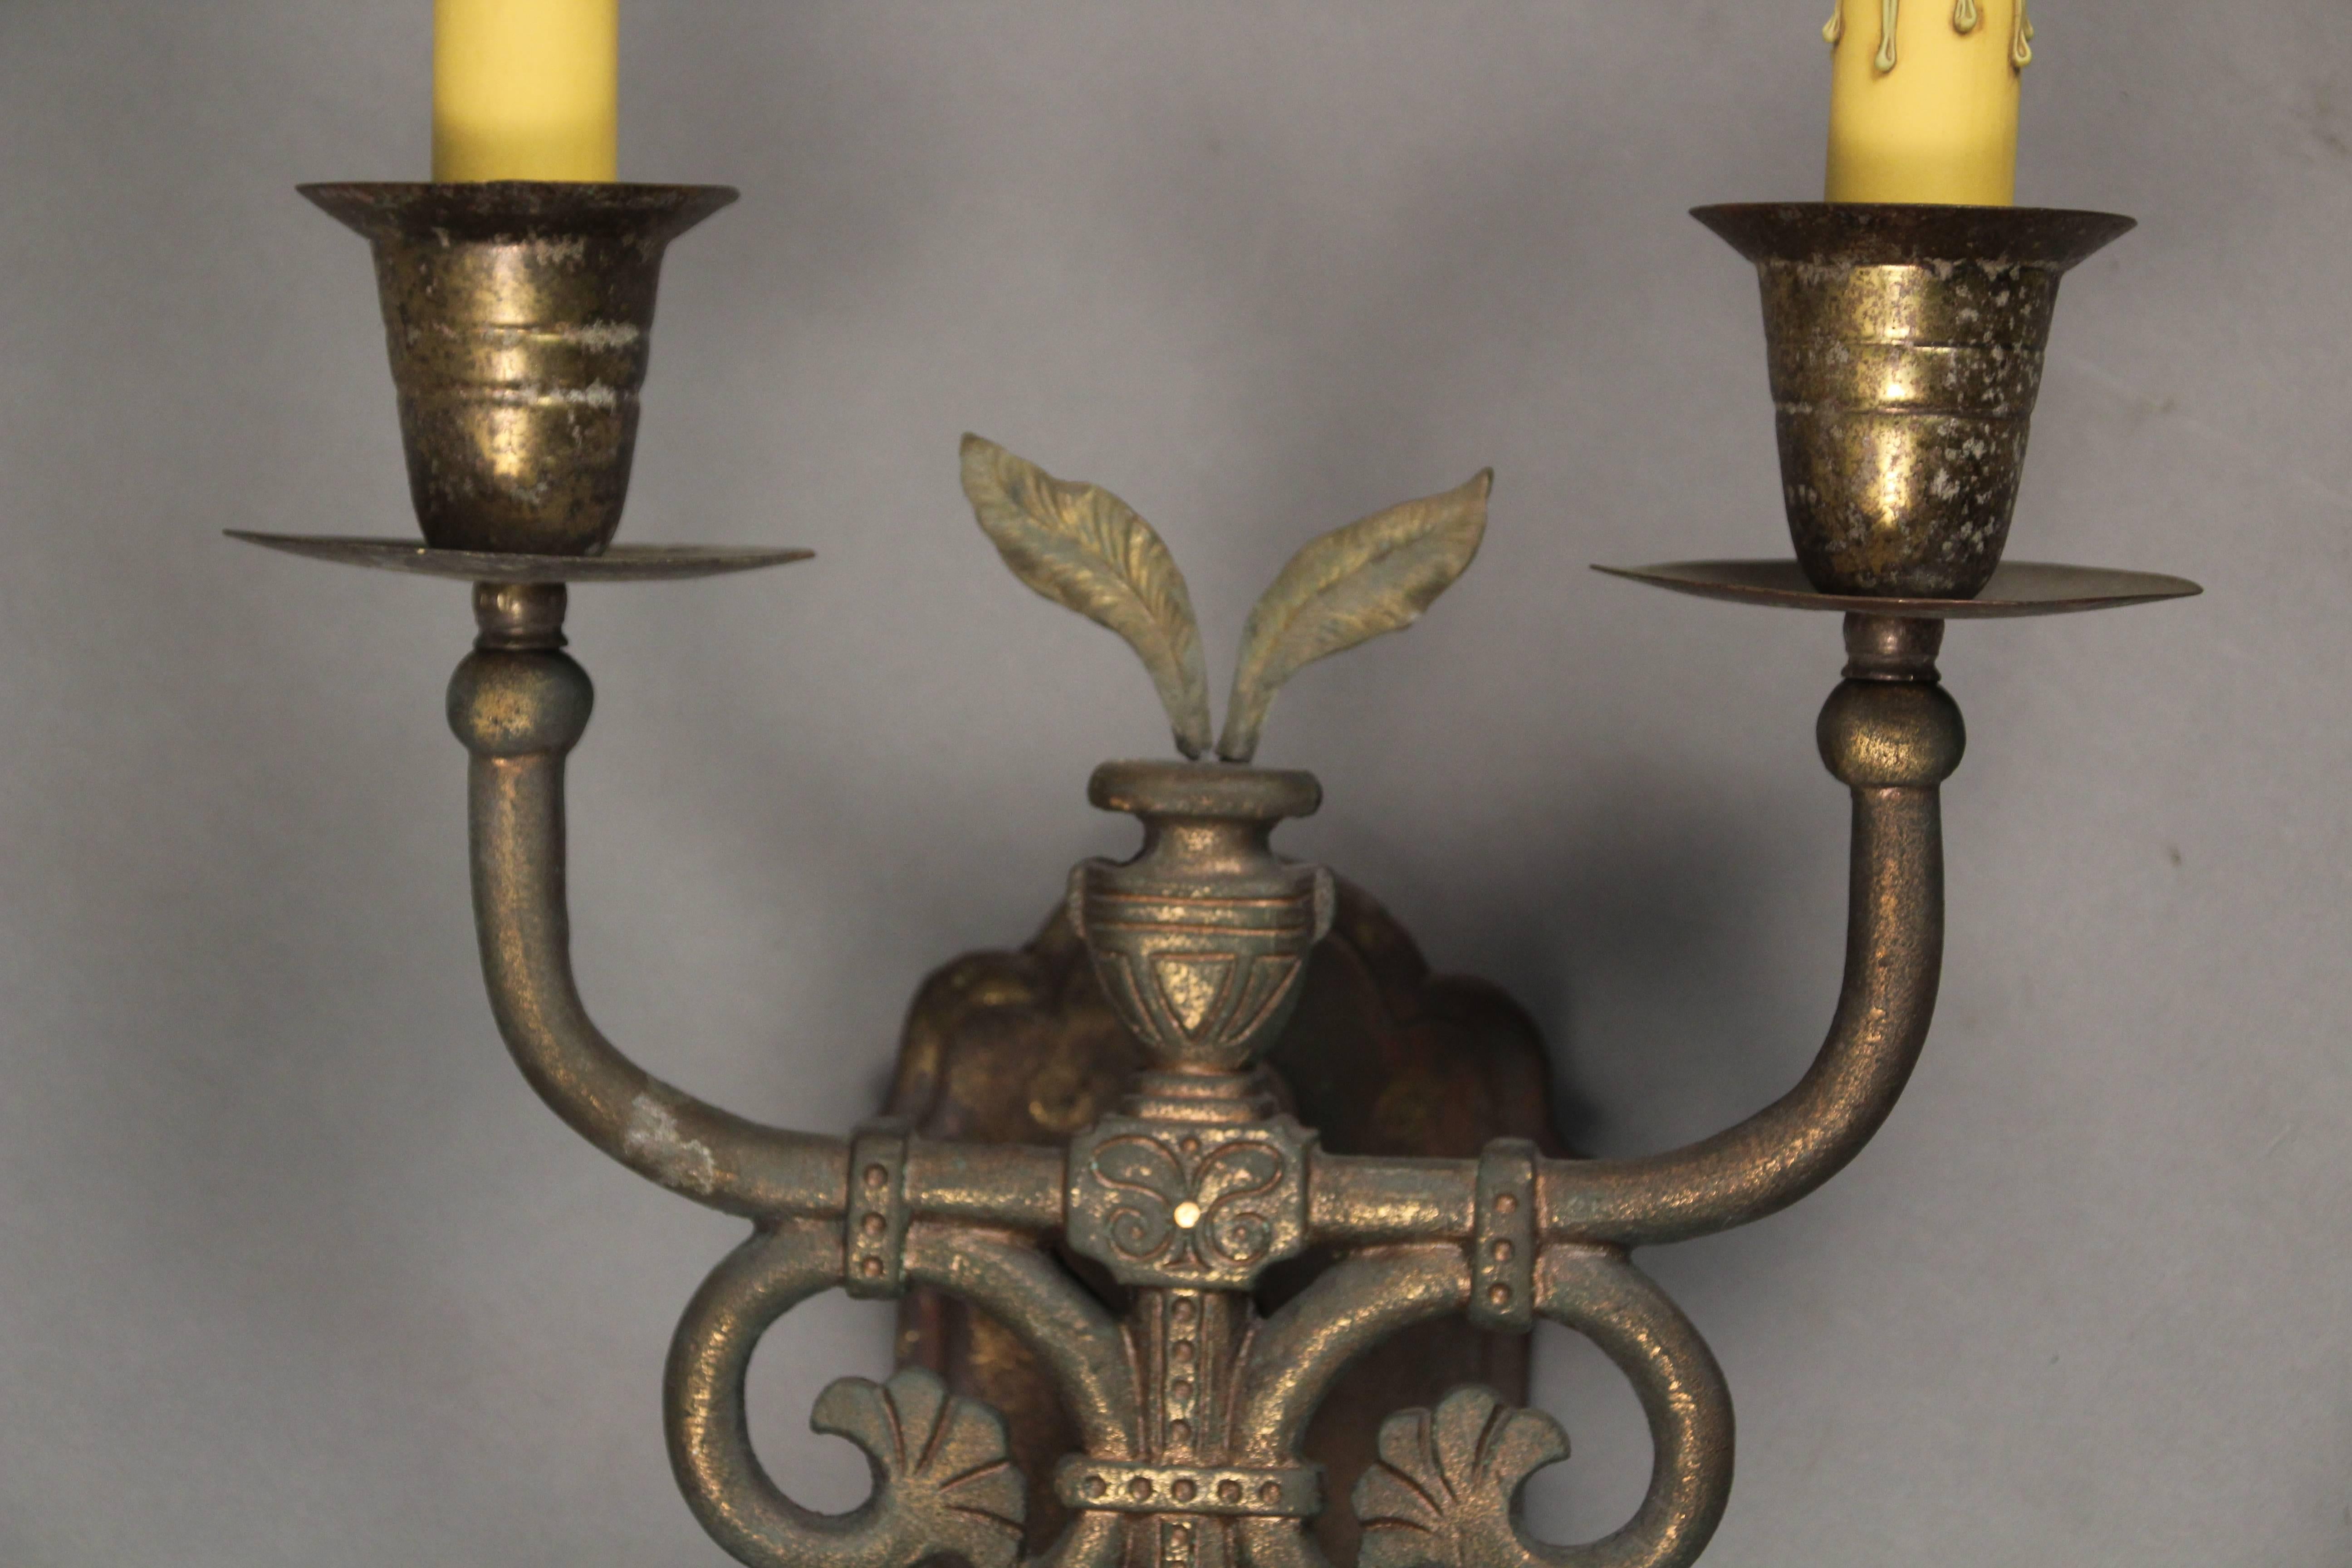 American Antique Pair of Large-Scale Spanish Revival Double Sconces, circa 1920s